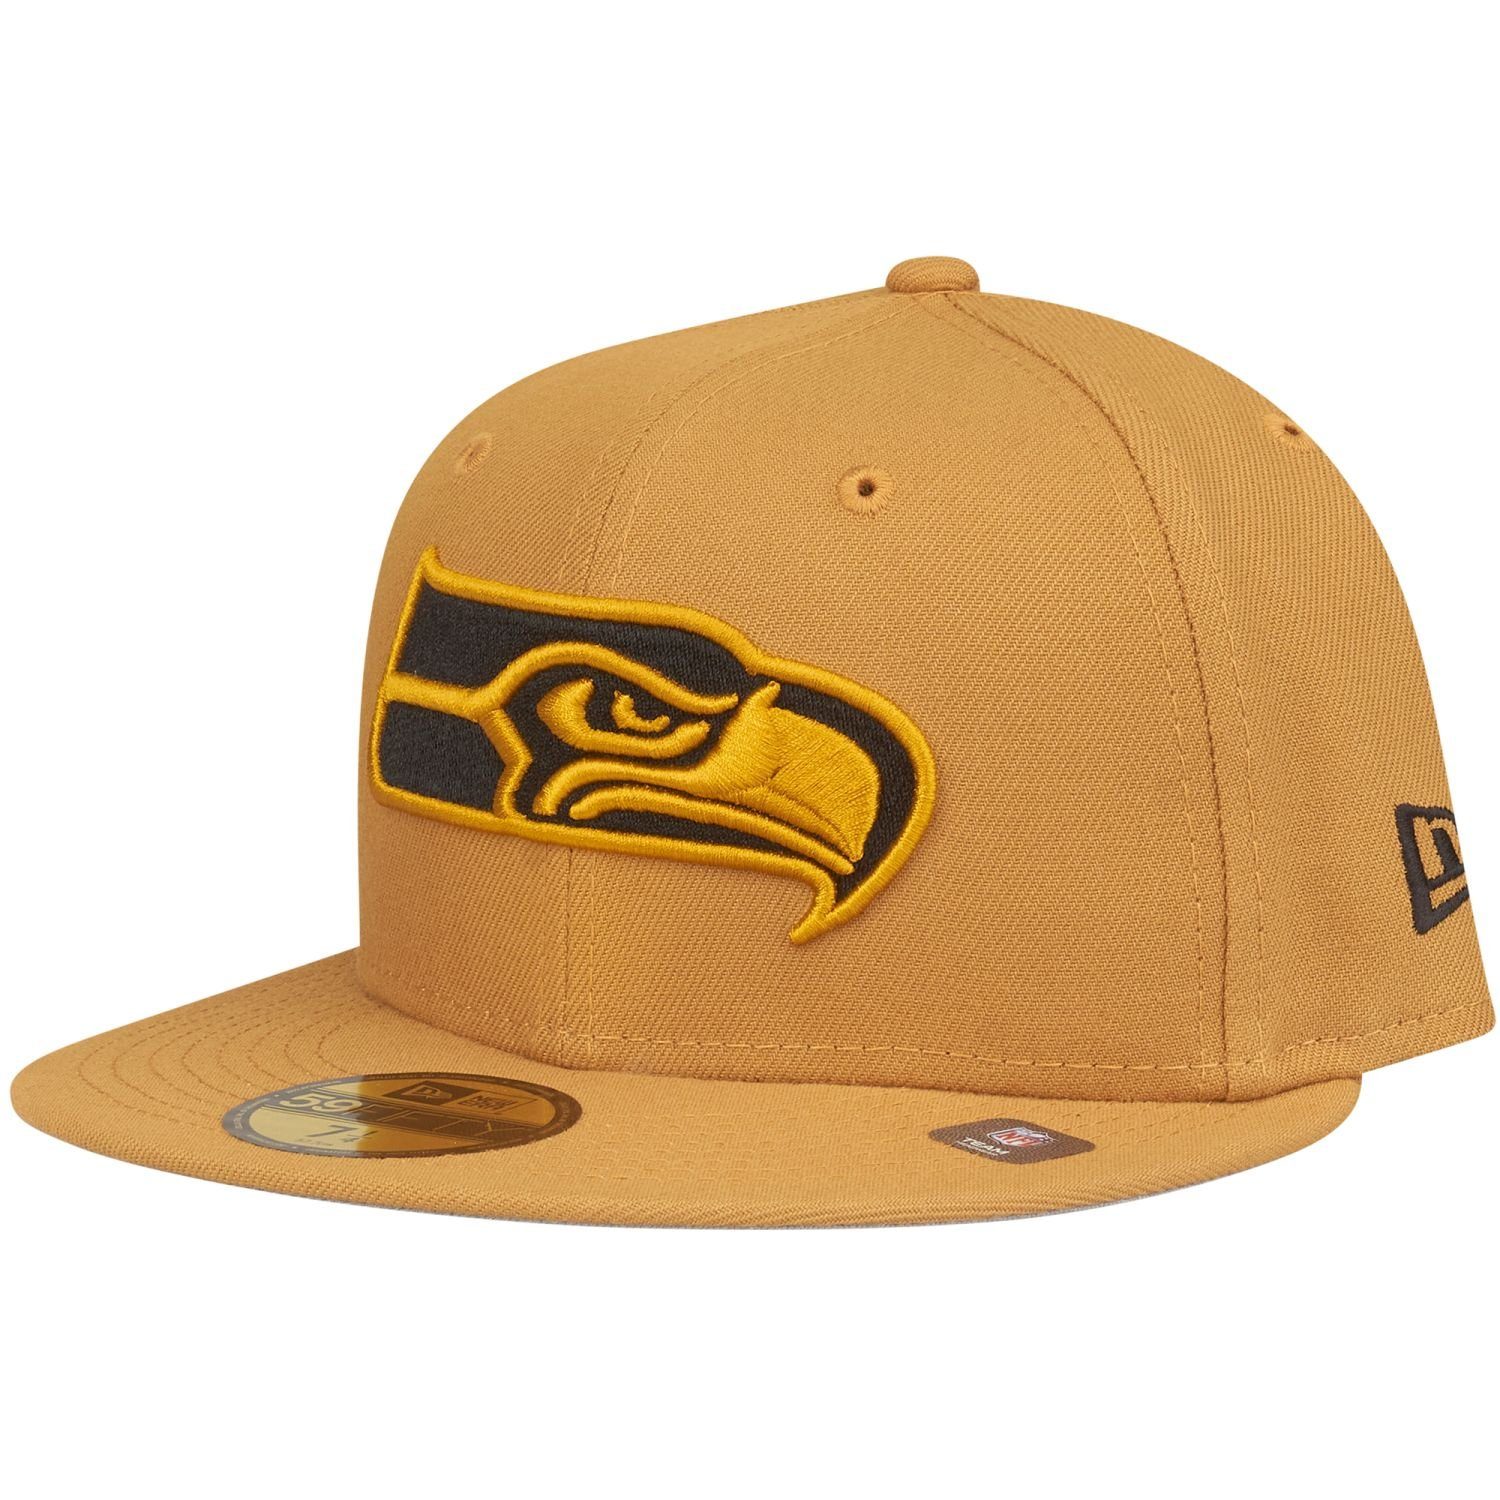 New Era Fitted Cap 59Fifty Seattle Seahawks panama